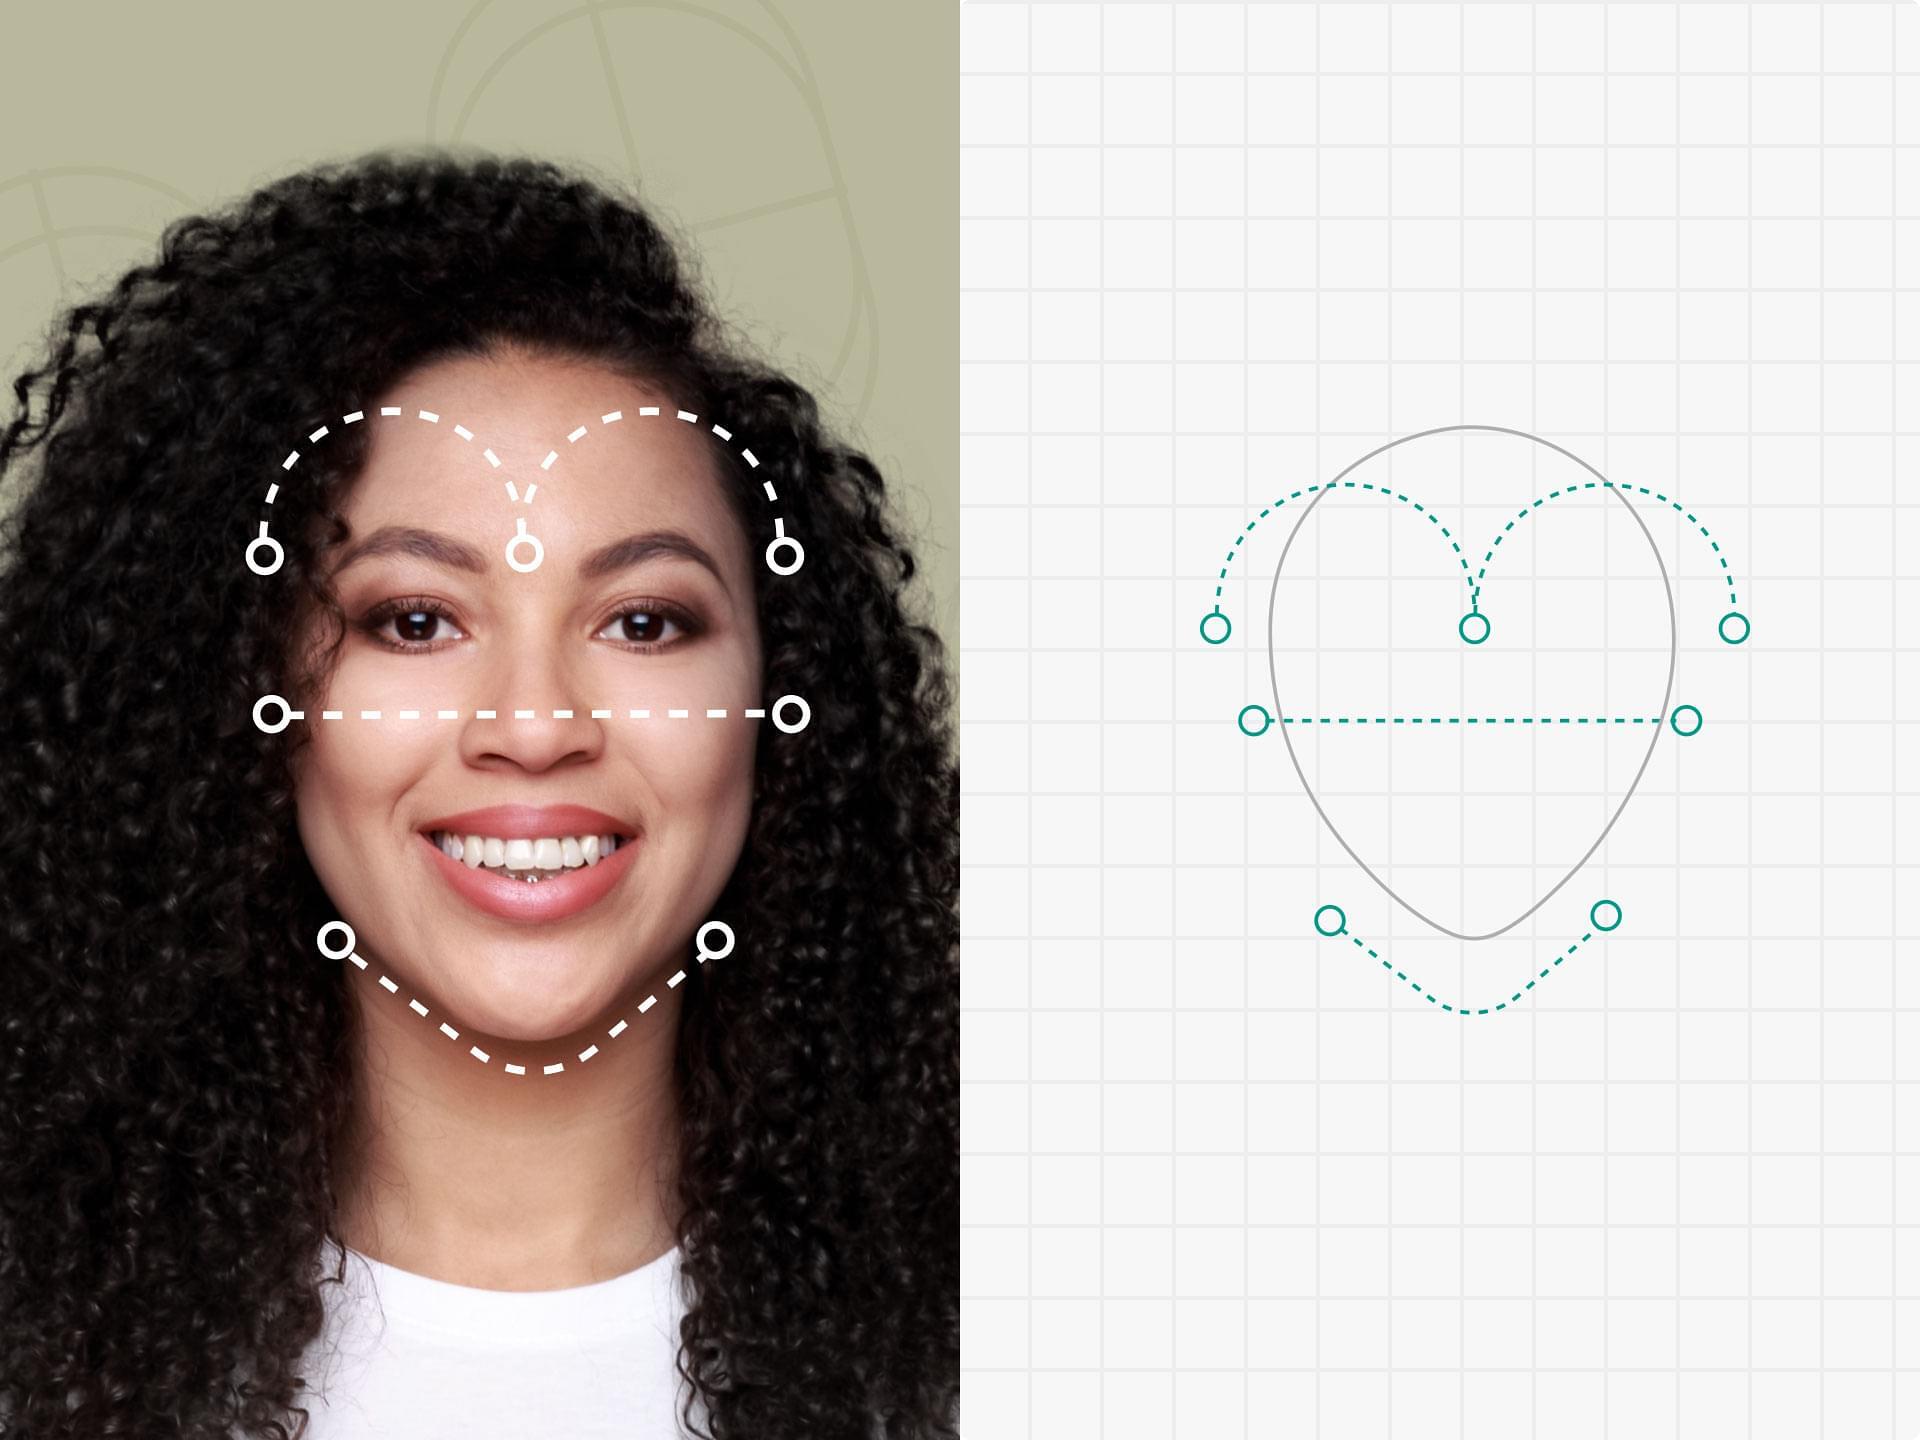 What shape glasses look best on a heart shaped face